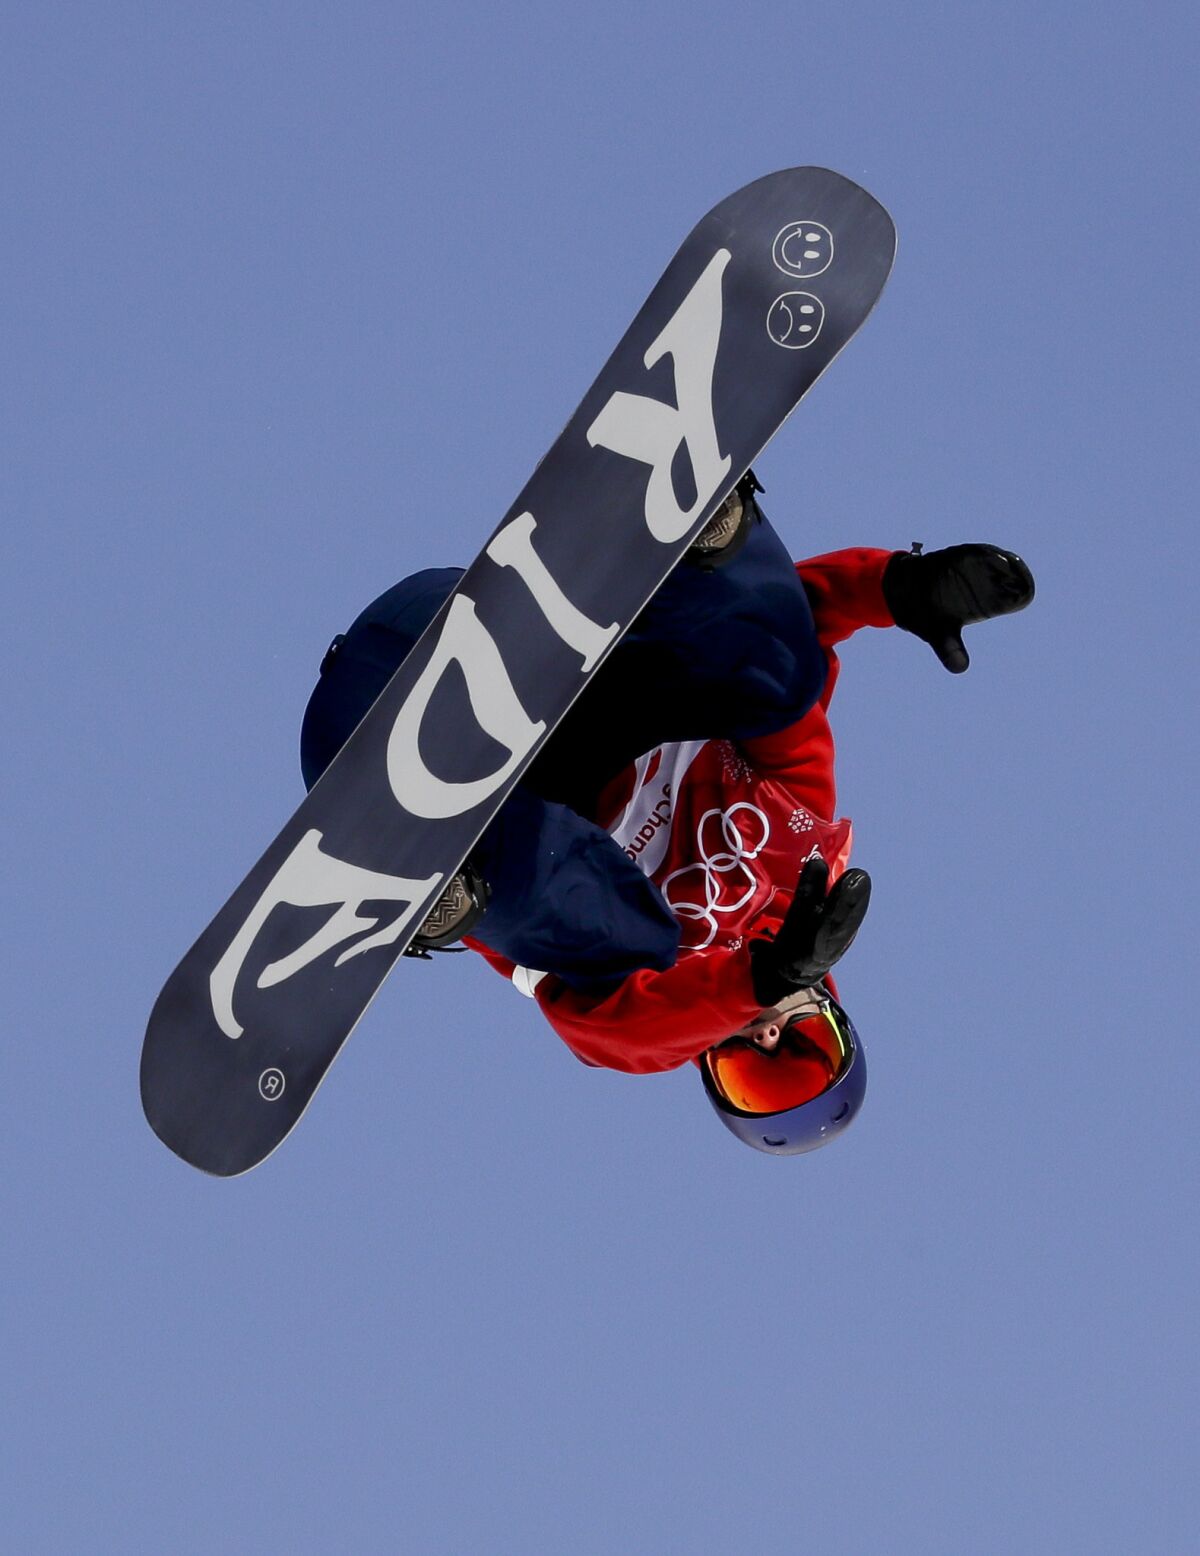 Billy Morgan of Britain jumps in the men's big air snowboard qualification competition at the 2018 Winter Olympics in Pyeongchang. (Kirsty Wigglesworth / AP)